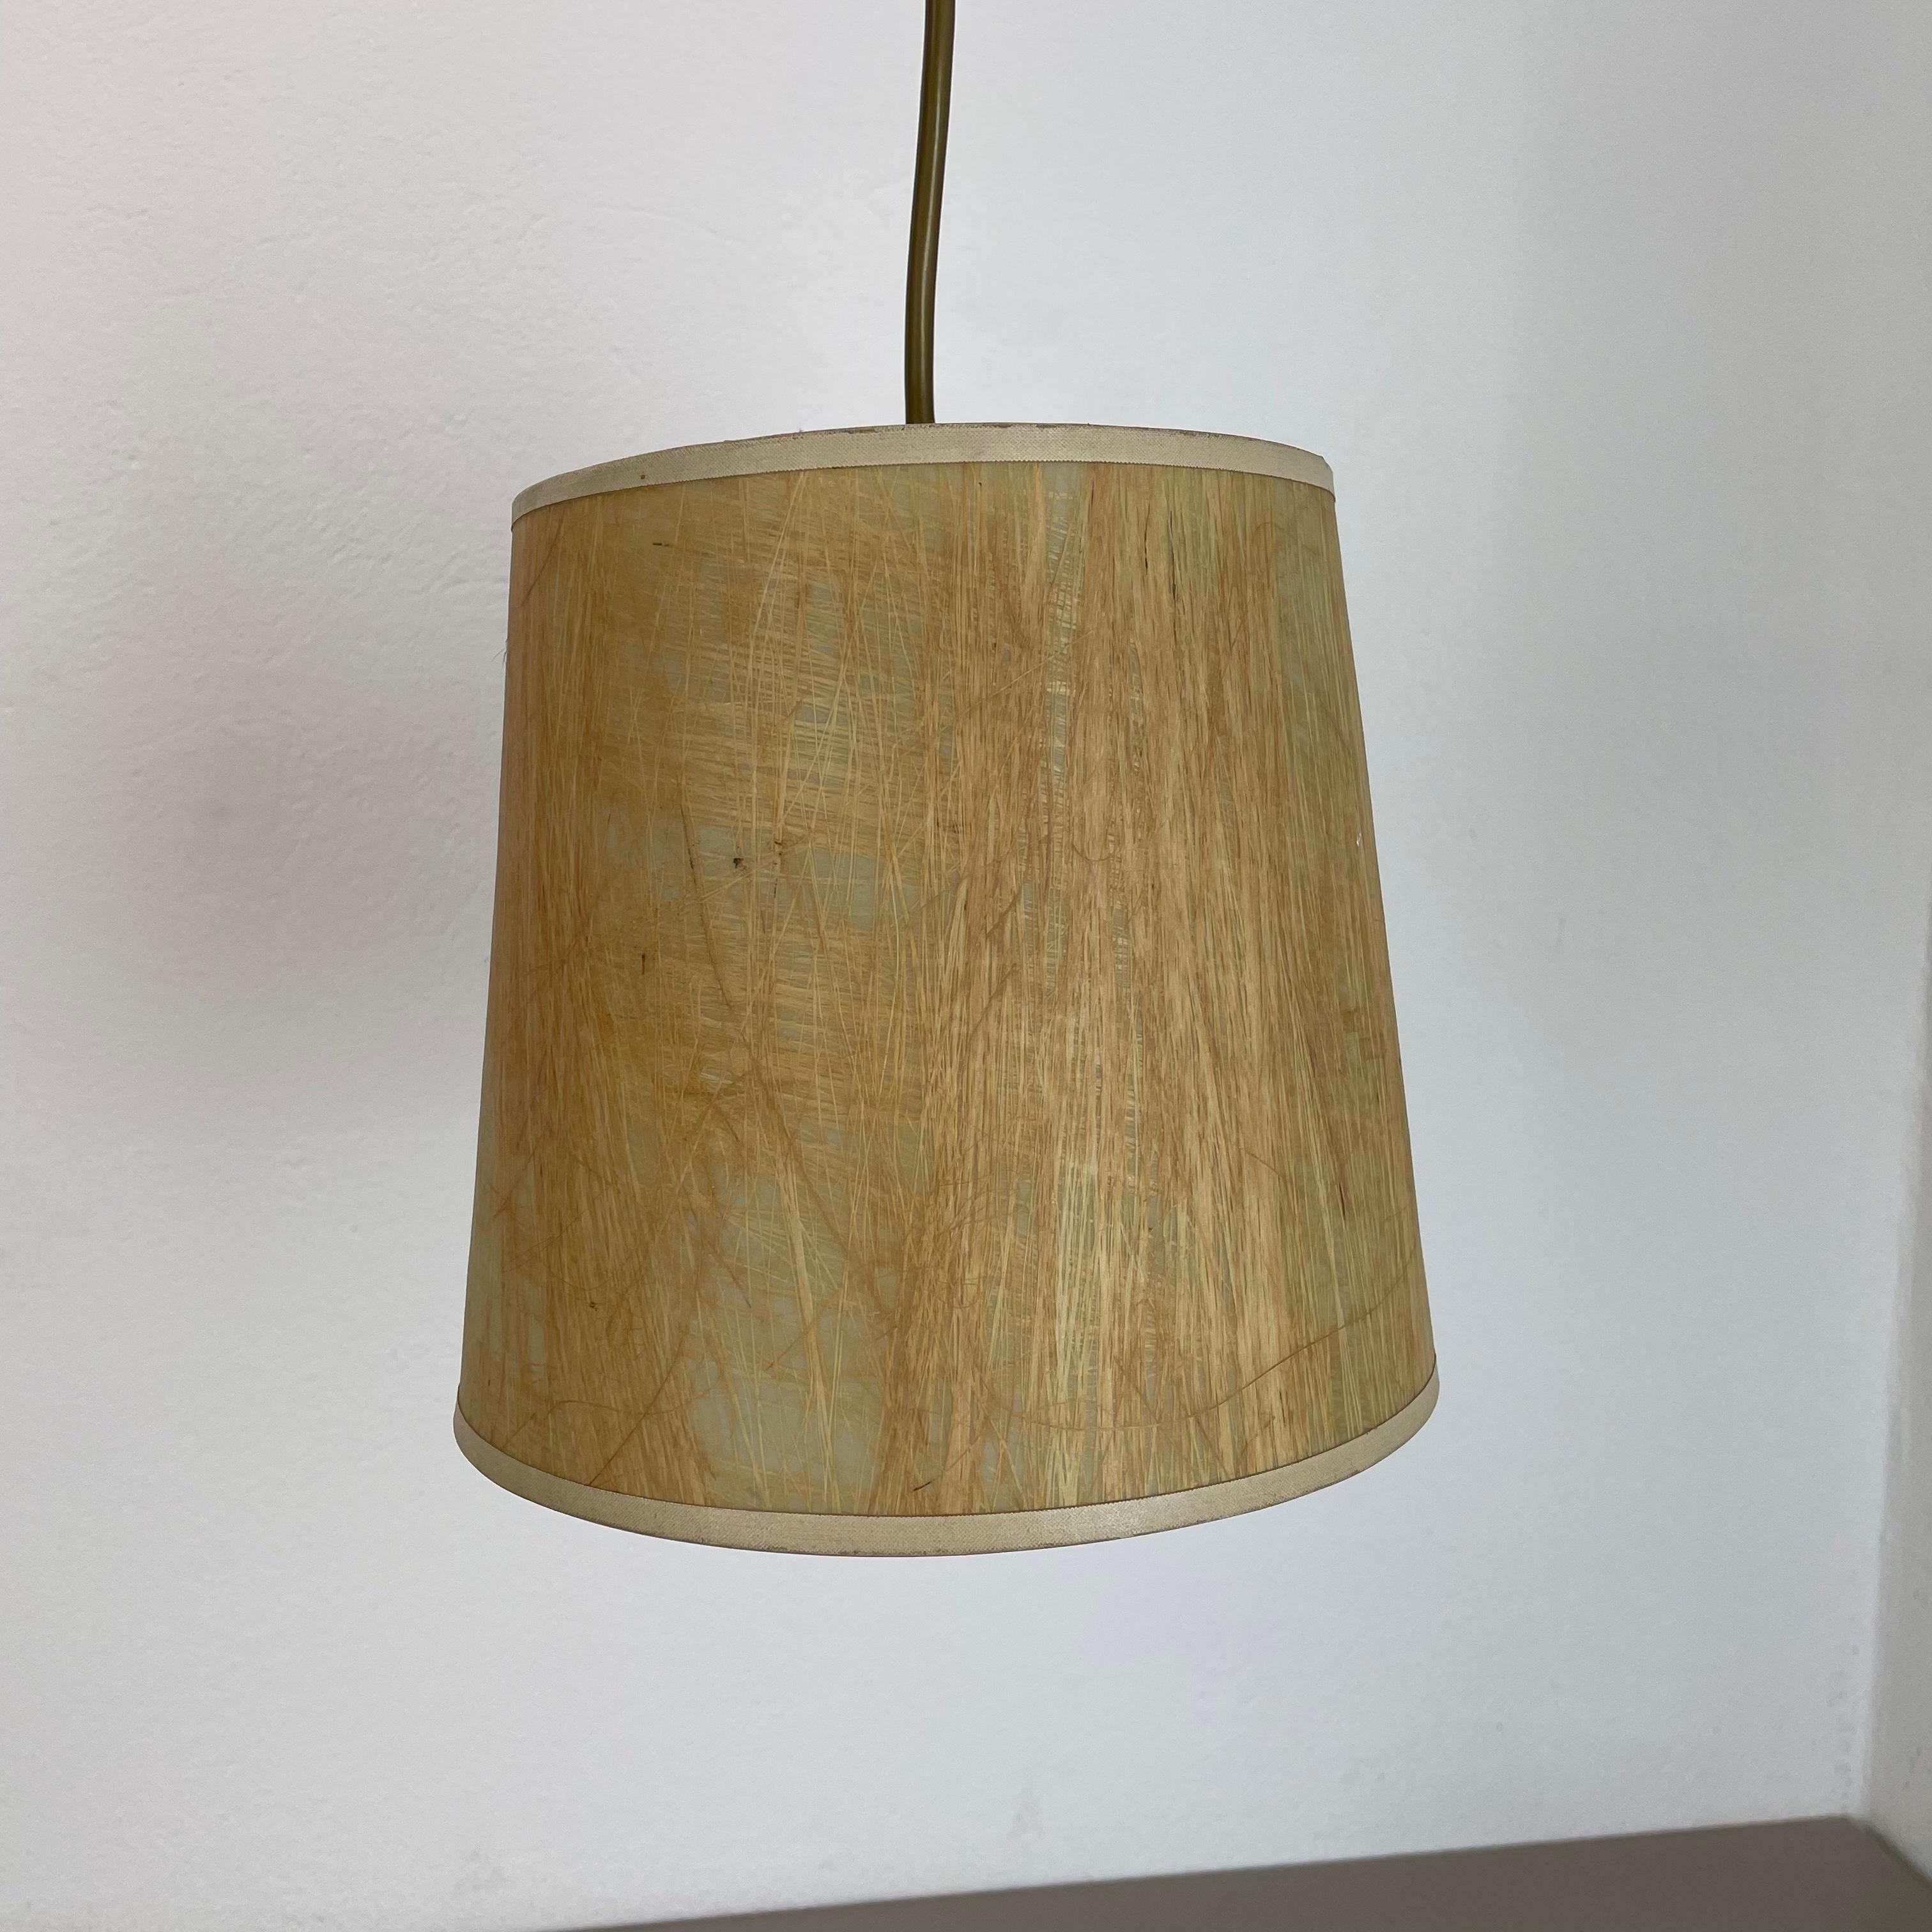 Minimalist Stilnovo Style Adjustable Counter Weight Brass Wall Light Italy 1960s In Good Condition For Sale In Kirchlengern, DE